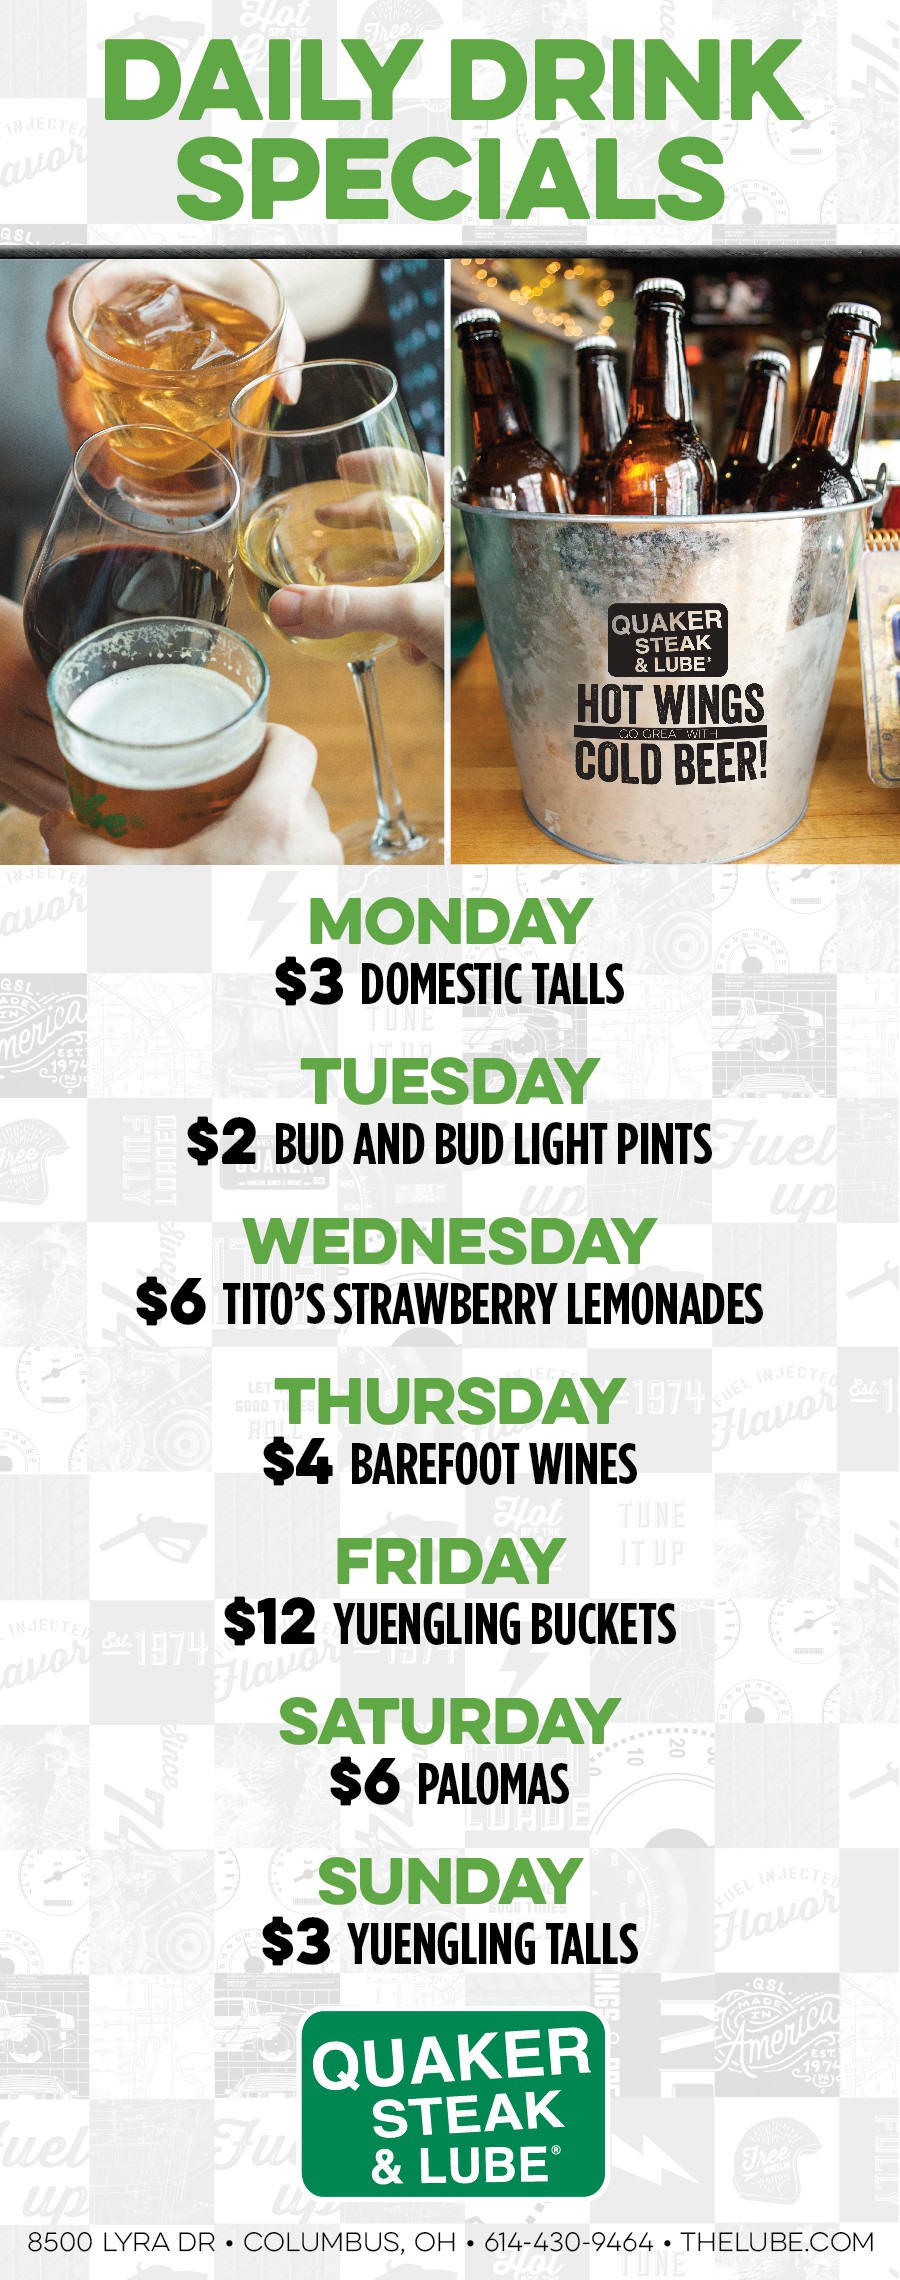 Daily Drink Specials At the Quaker Steak & Lube Columbus Restaurant